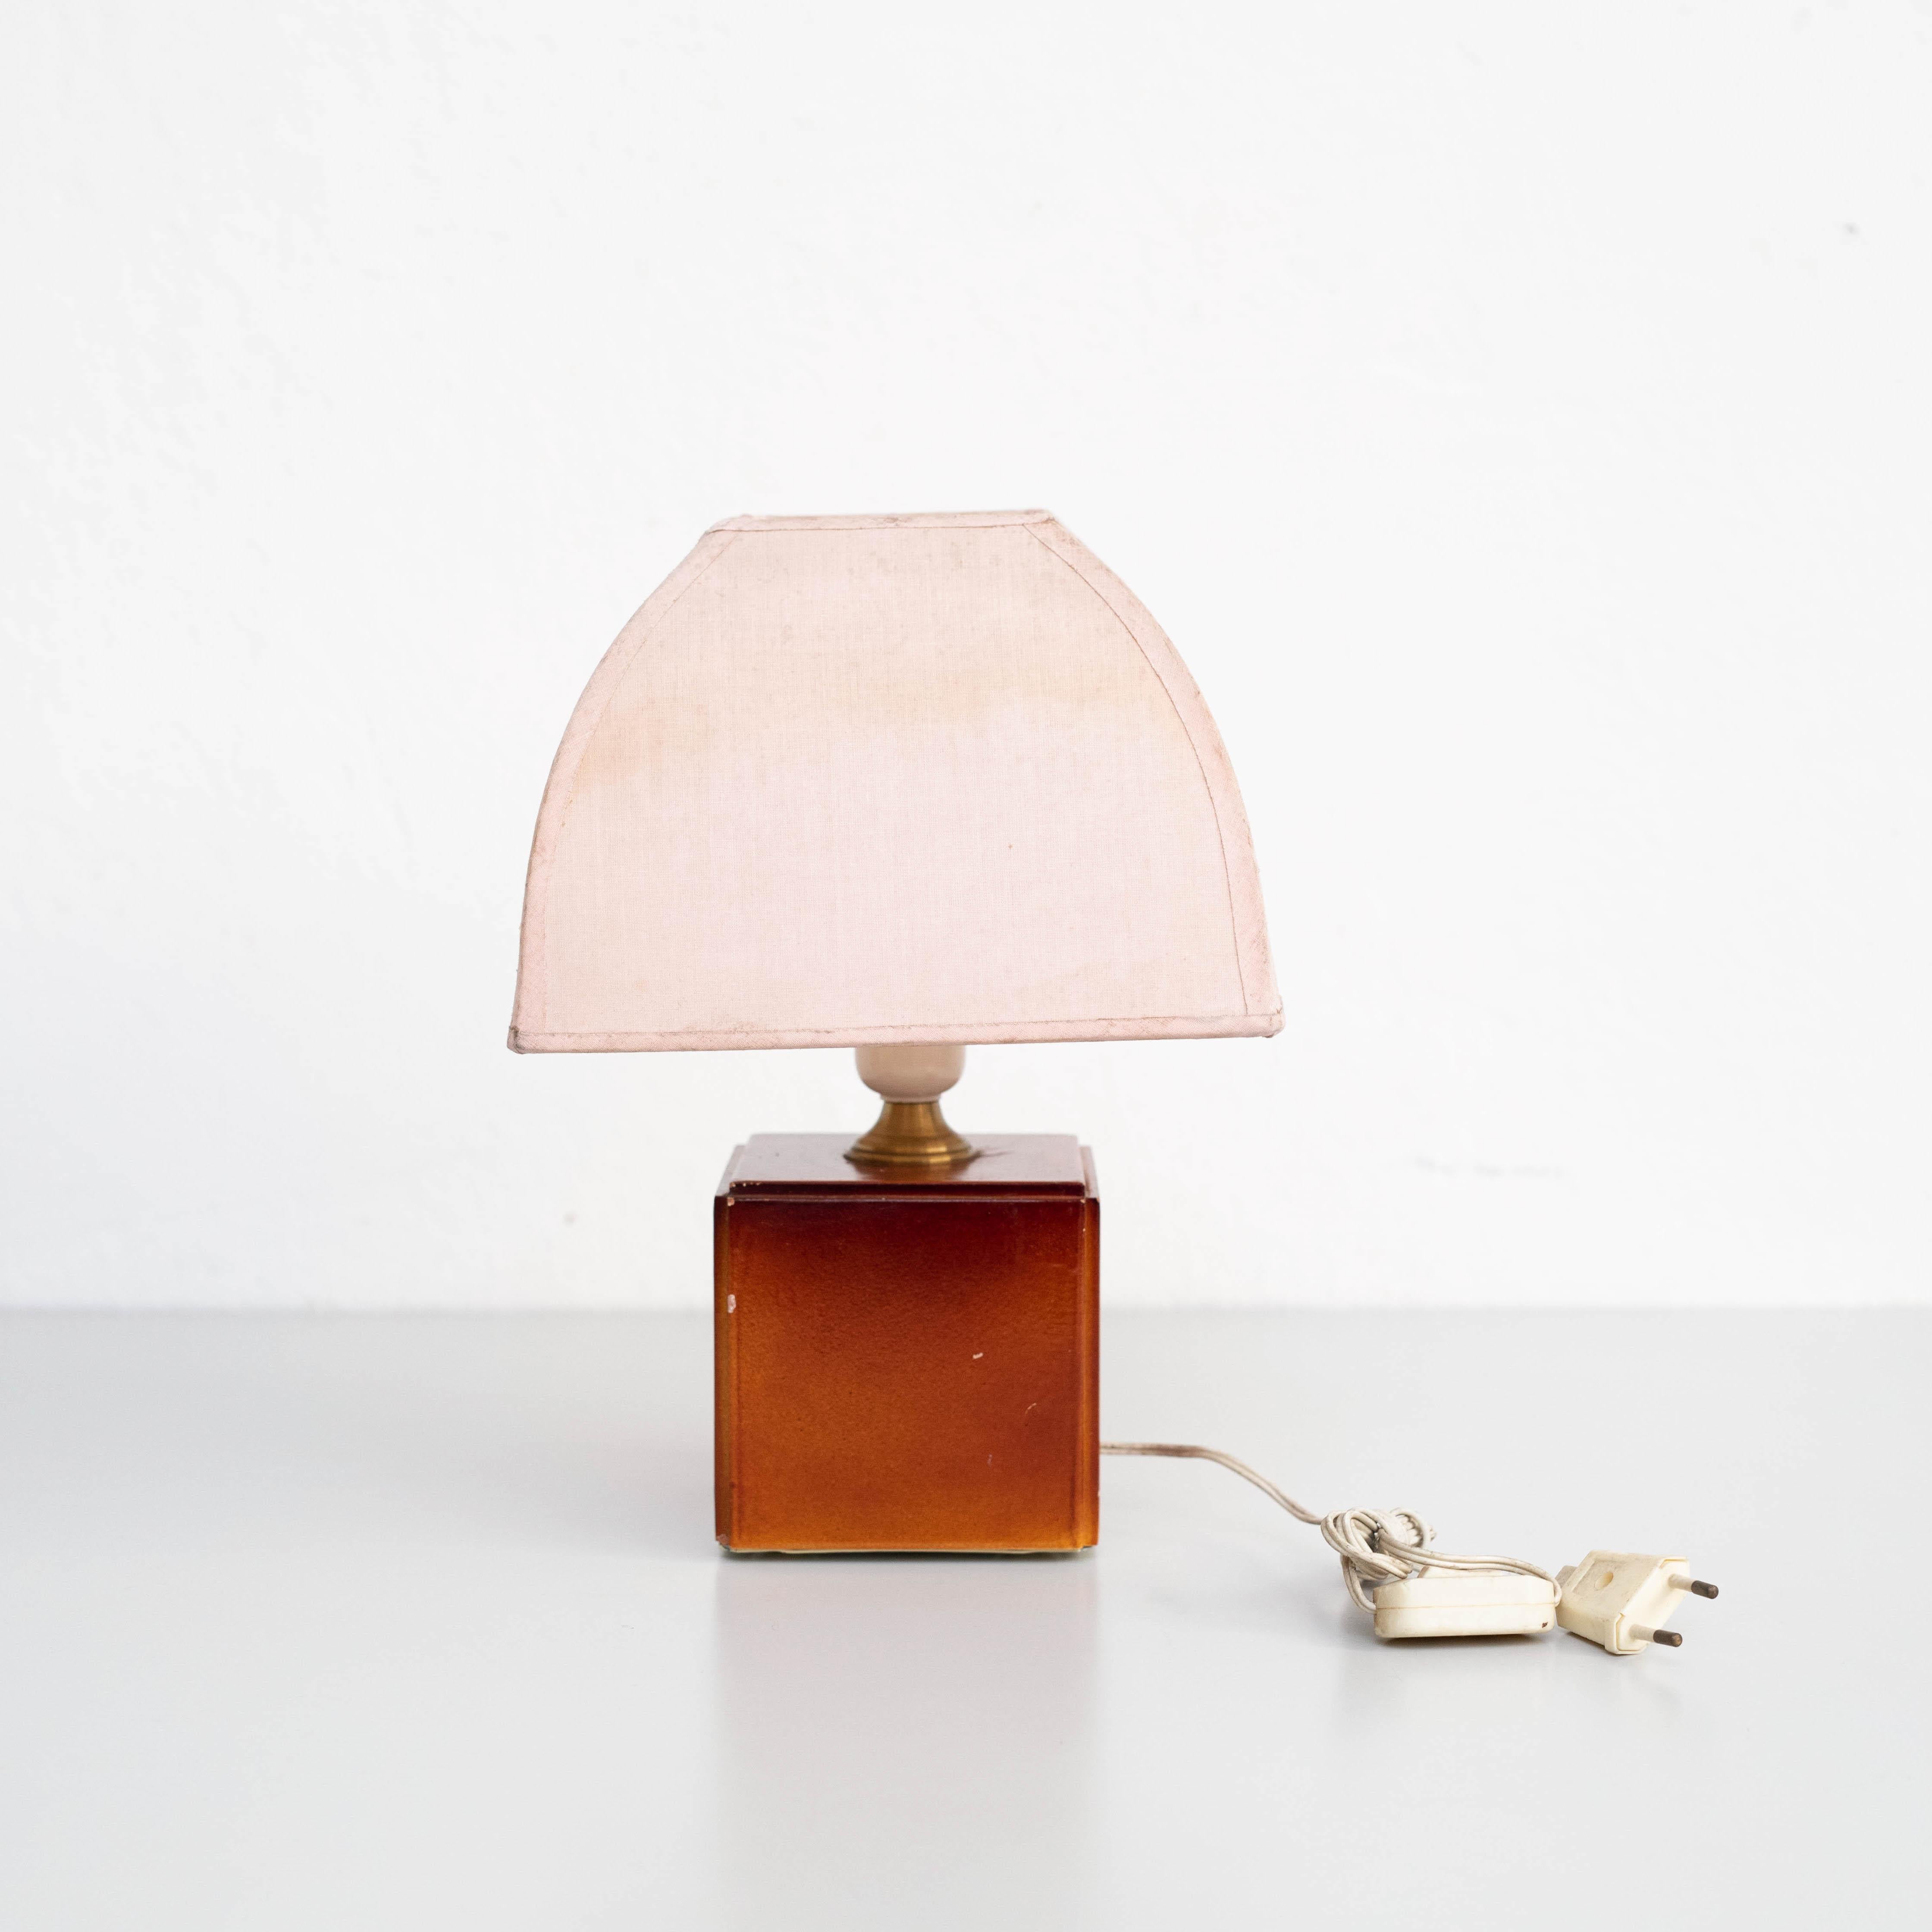 Table lamp, Ceramic, Circa 1970.

In original condition, wear consistent with age and use, preserving a beautiful patina.

Wired for Europe. Electrification has not been tested.
  